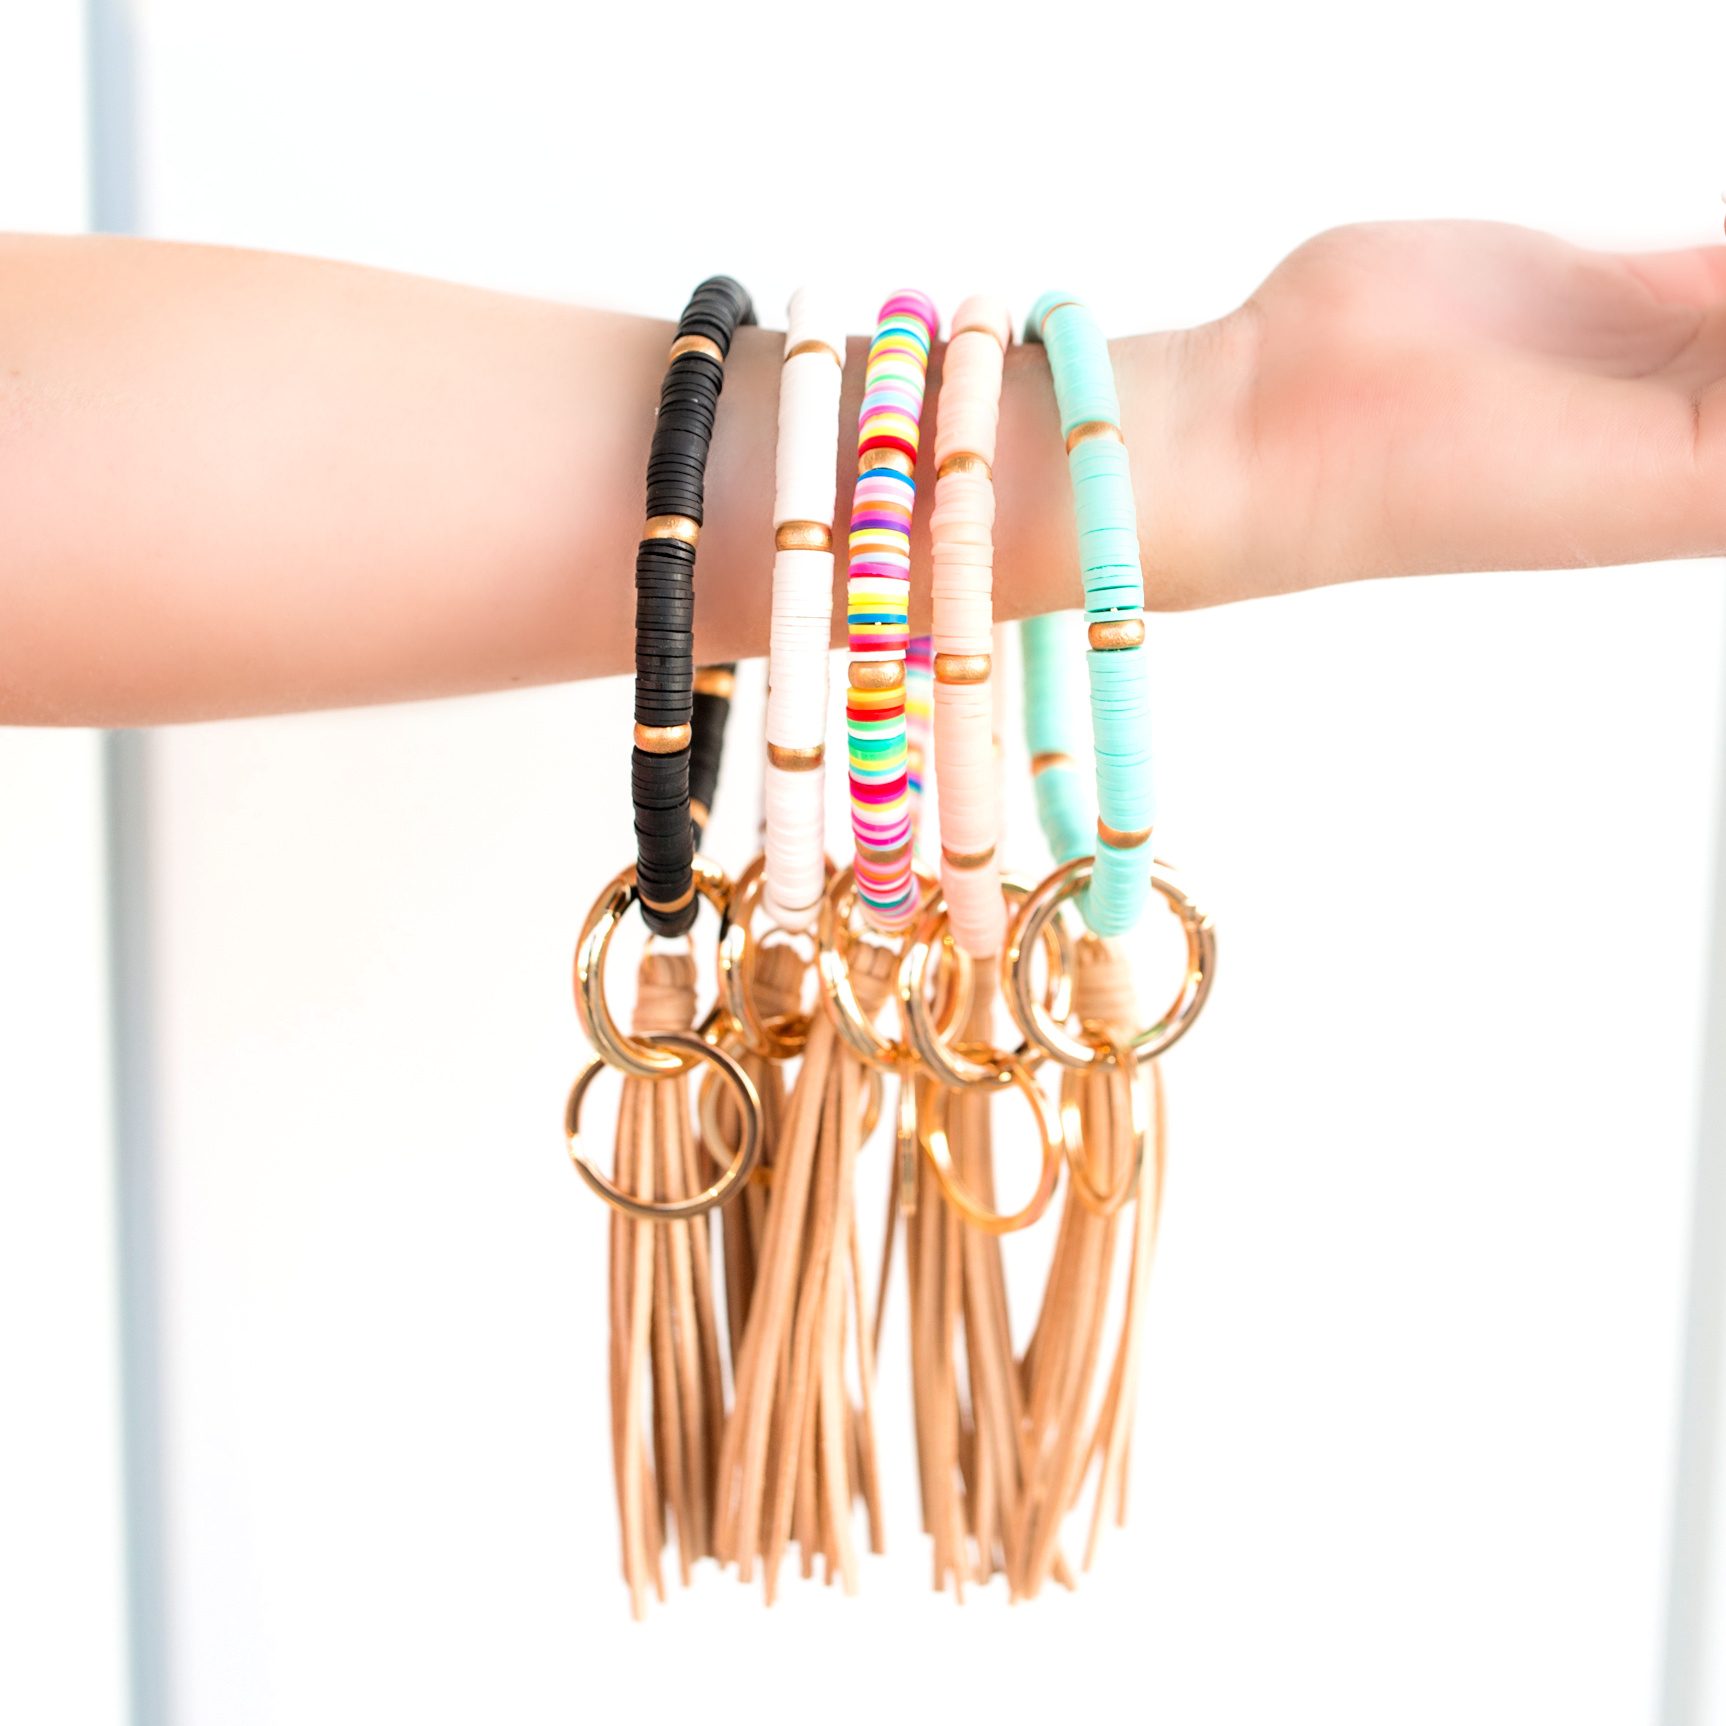 O Ring Keychain - Tassel Collection